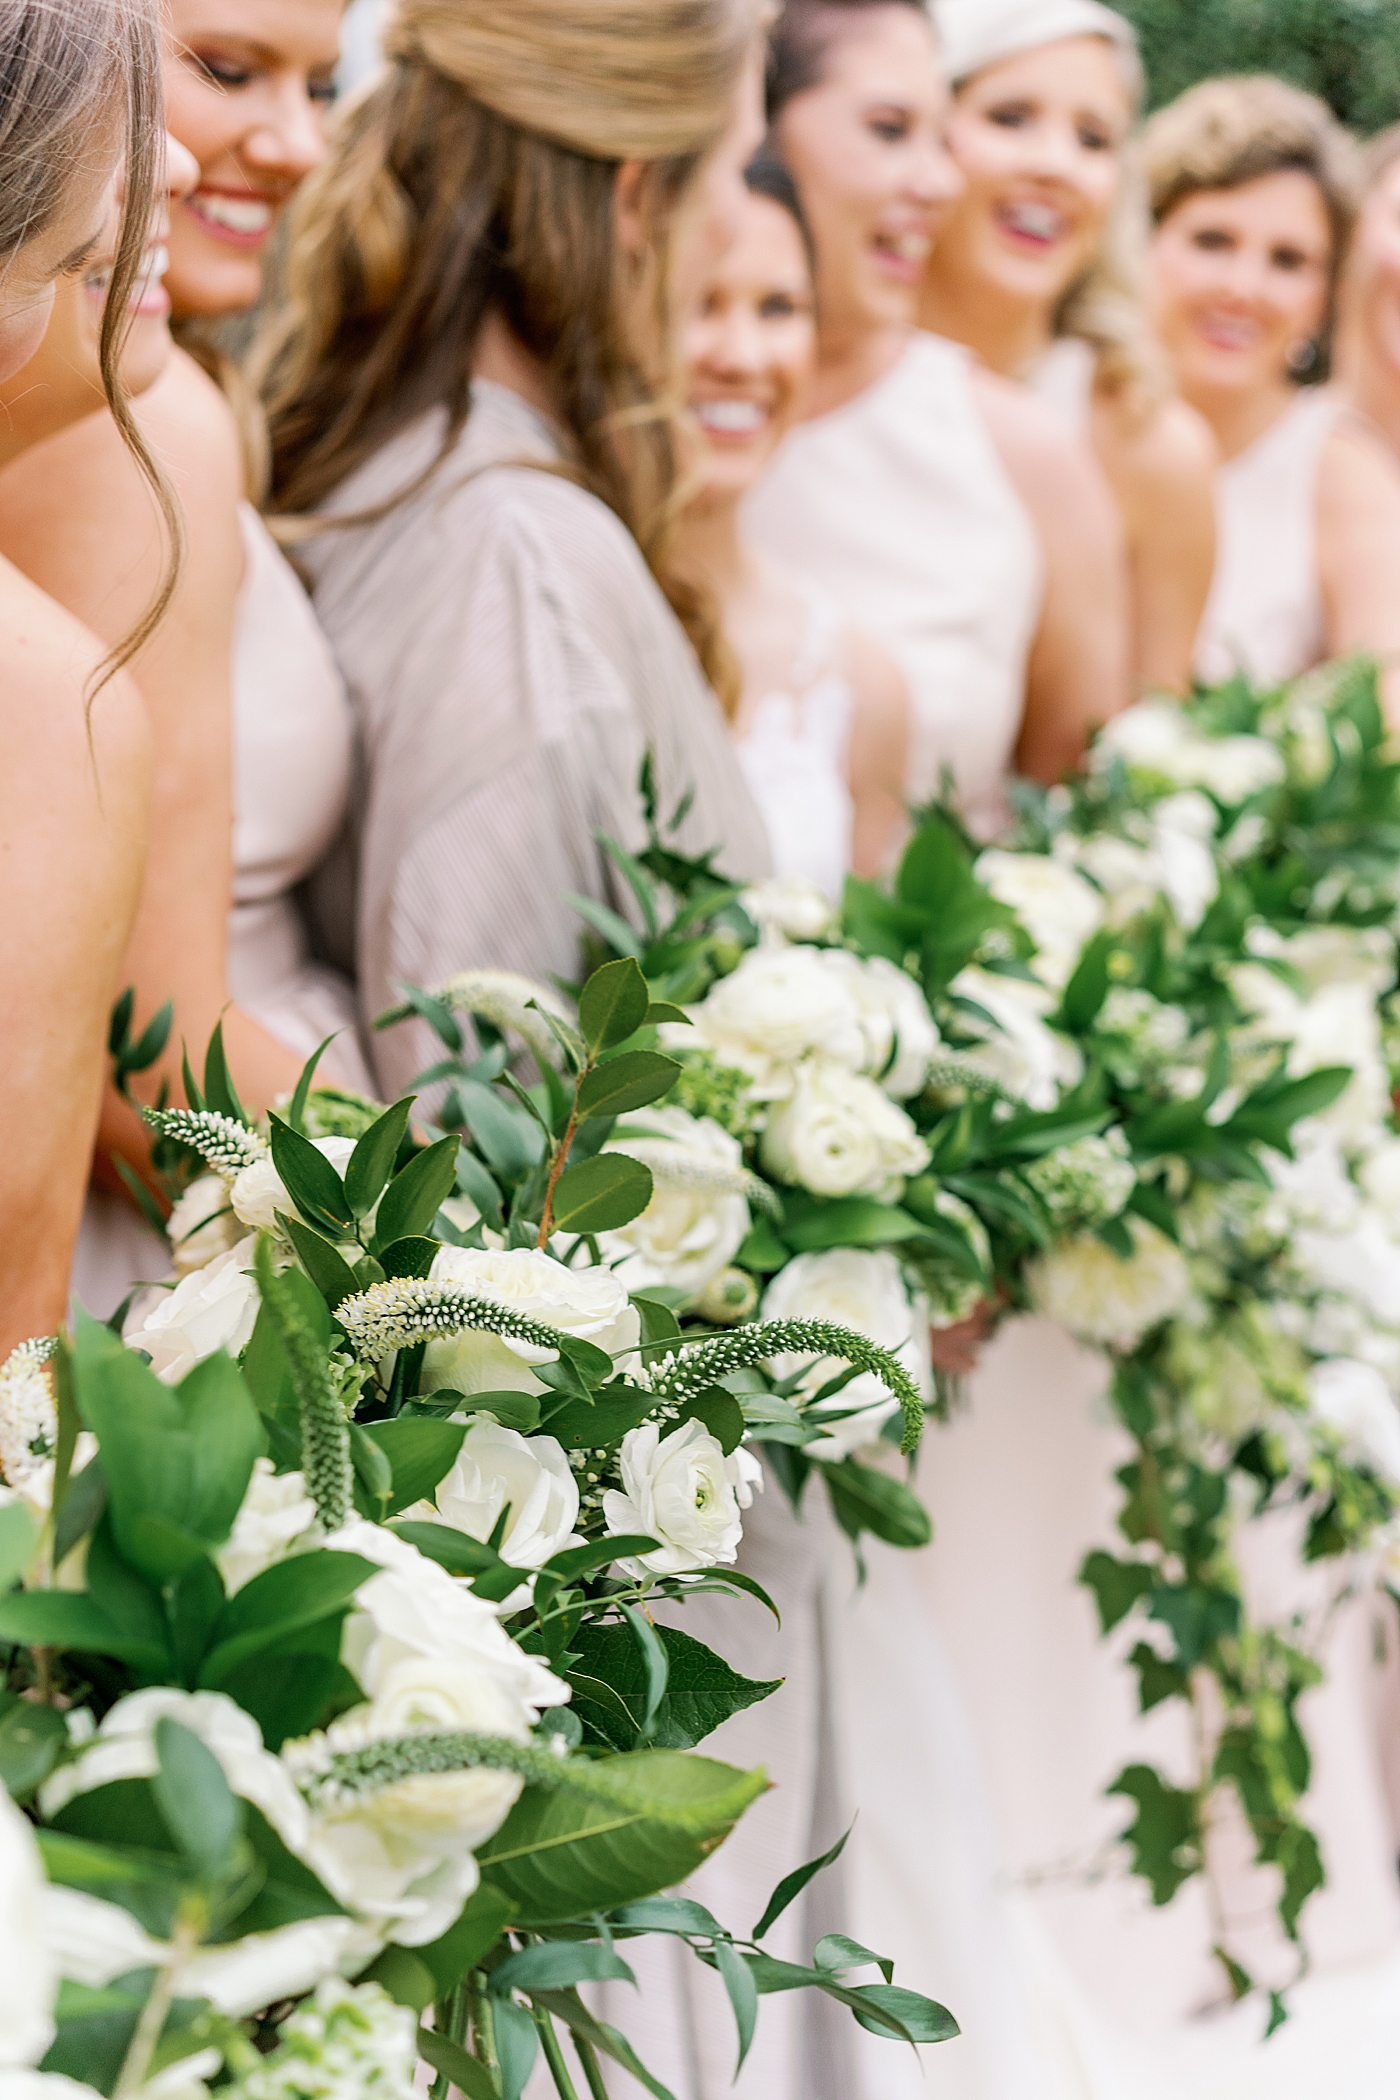 Bridal party flowers during Timeless Country Club Wedding | Photo by Annie Laura Photography